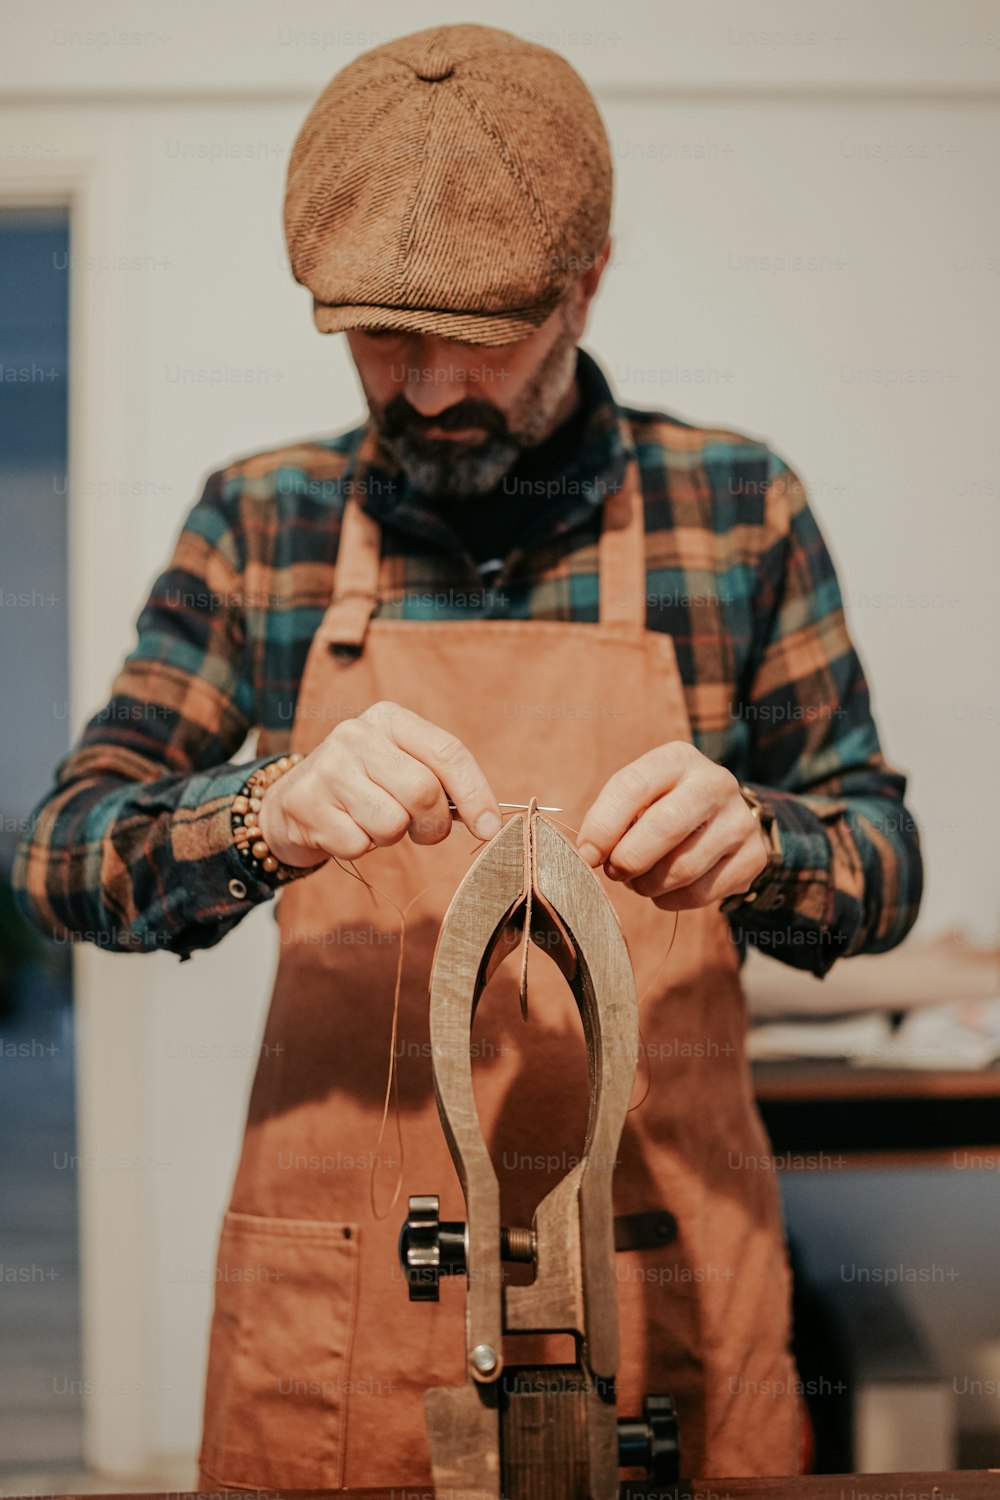 a man wearing an apron and a hat holding a pair of scissors